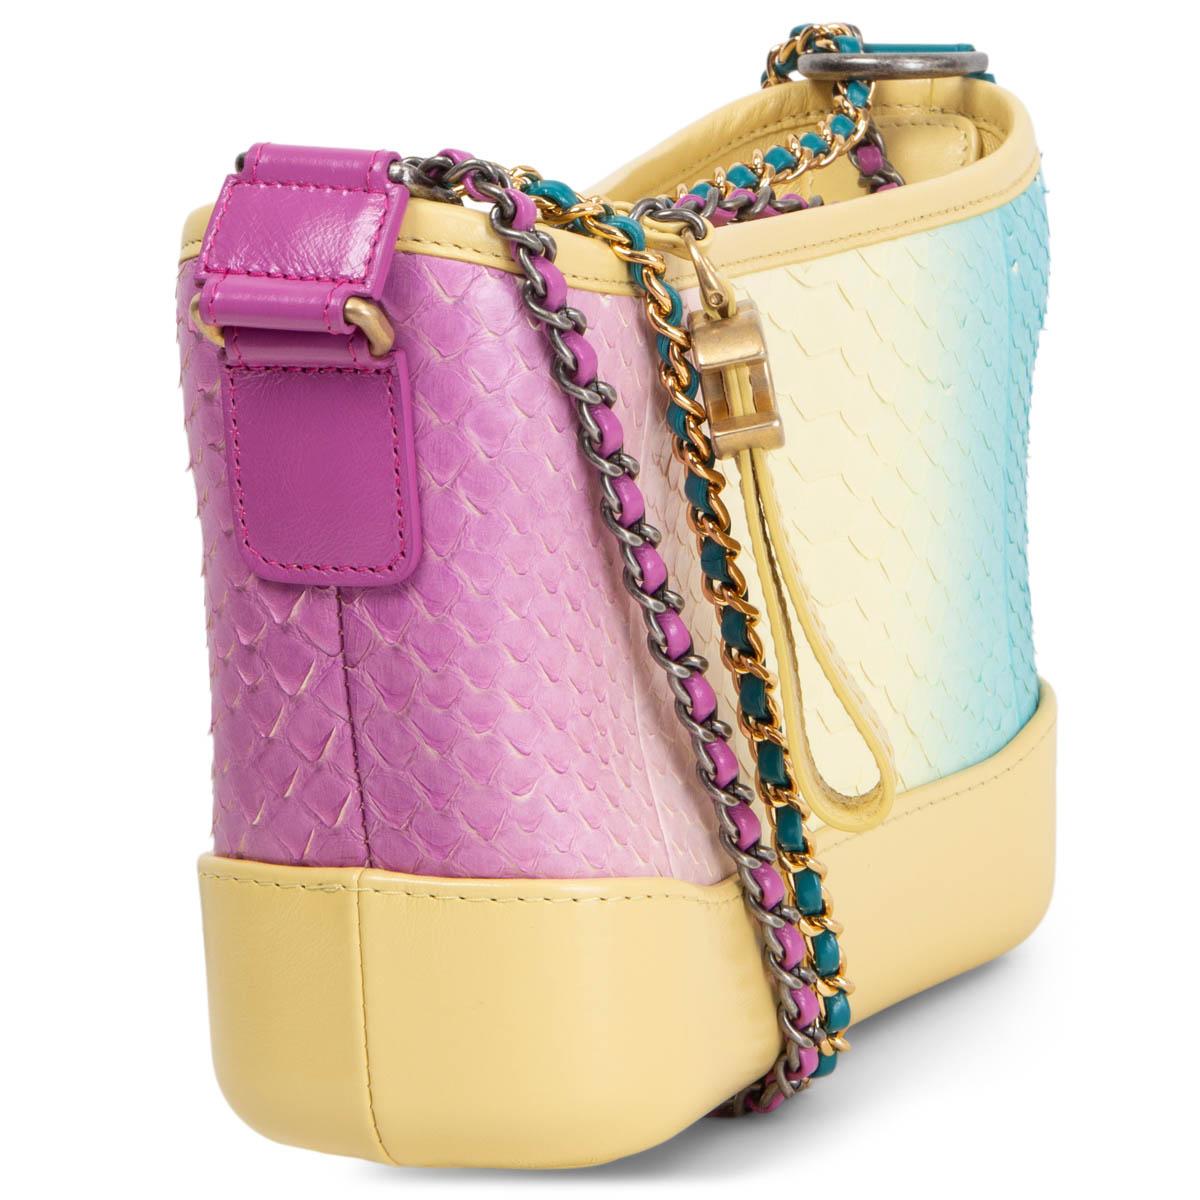 100% authentic Chanel 2019 Cruise Python Small Gabrielle hobo bag in gradient vanilla, petrol, turquoise, pink and rose pink python. Opens with a zipper on top and is lined in vanilla lambskin with one zipper pocket against the back and an open